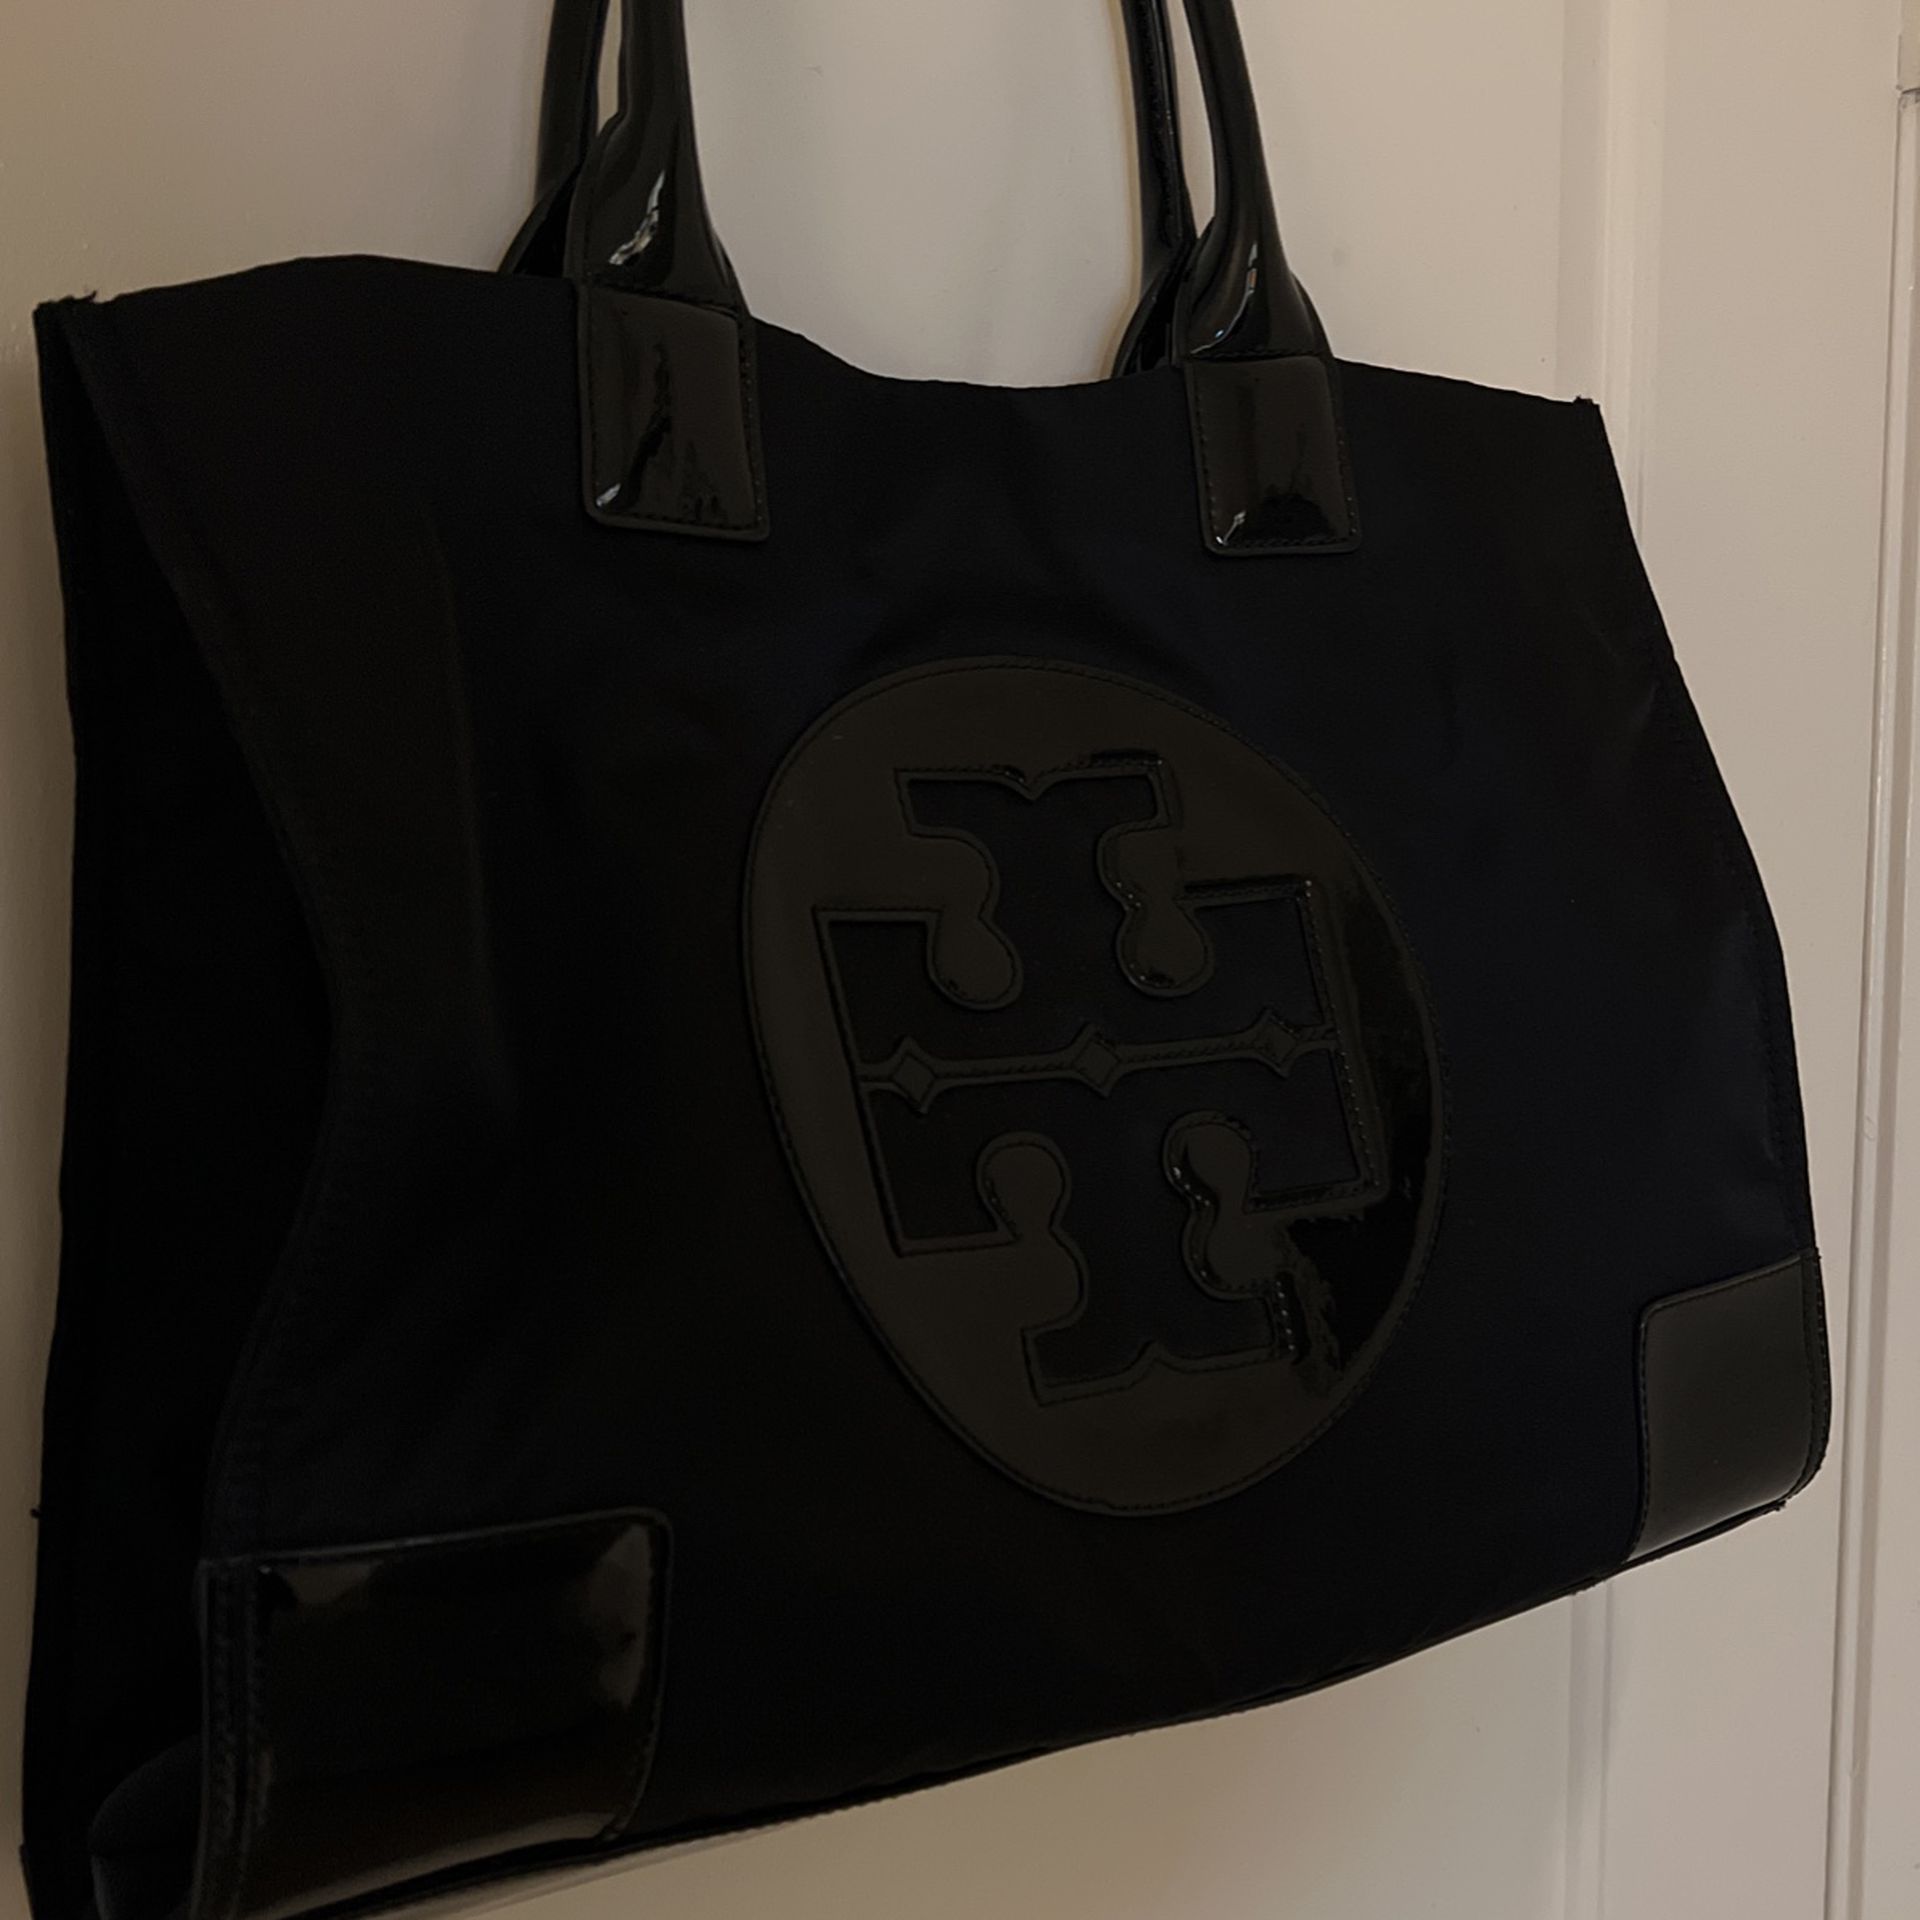 Tory Burch Ever Ready Tote for Sale in Chino Hills, CA - OfferUp